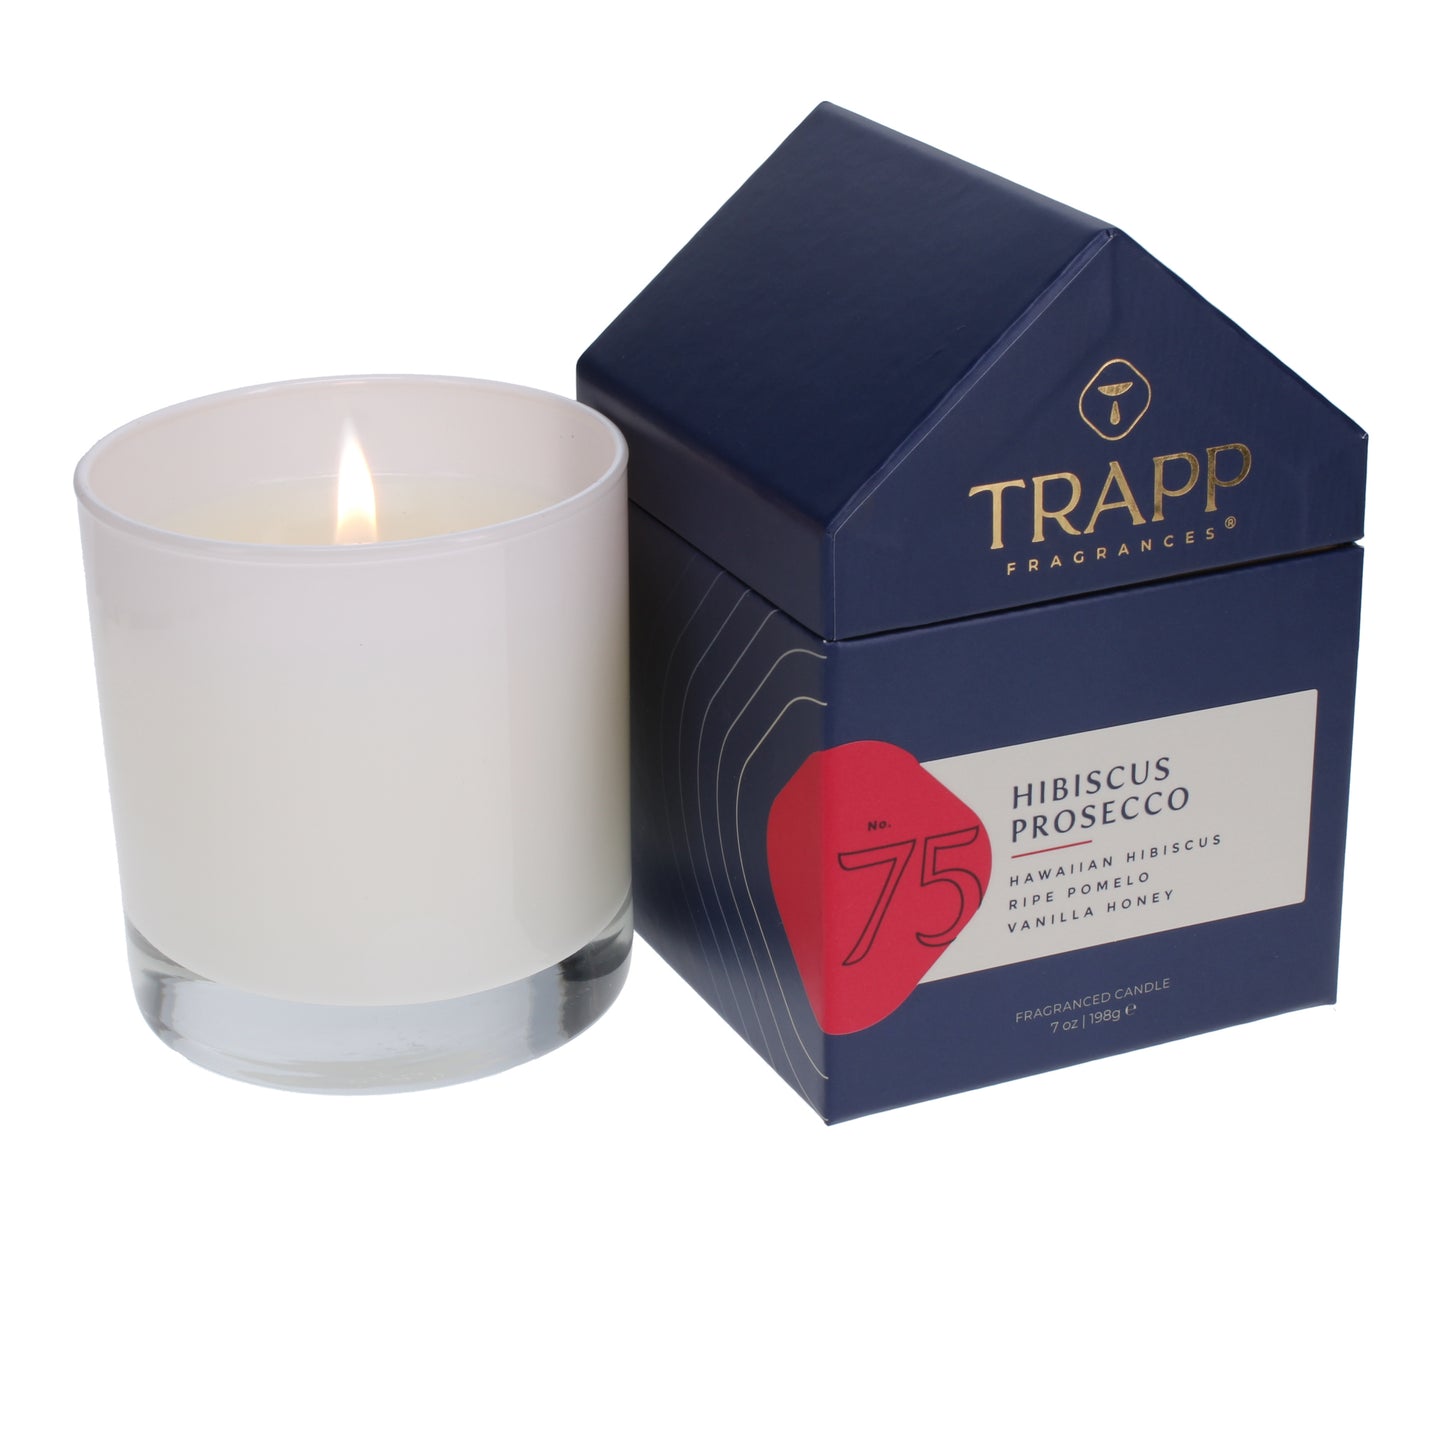 No. 75 Hibiscus Prosecco 7 oz. Candle in House Box Image 2